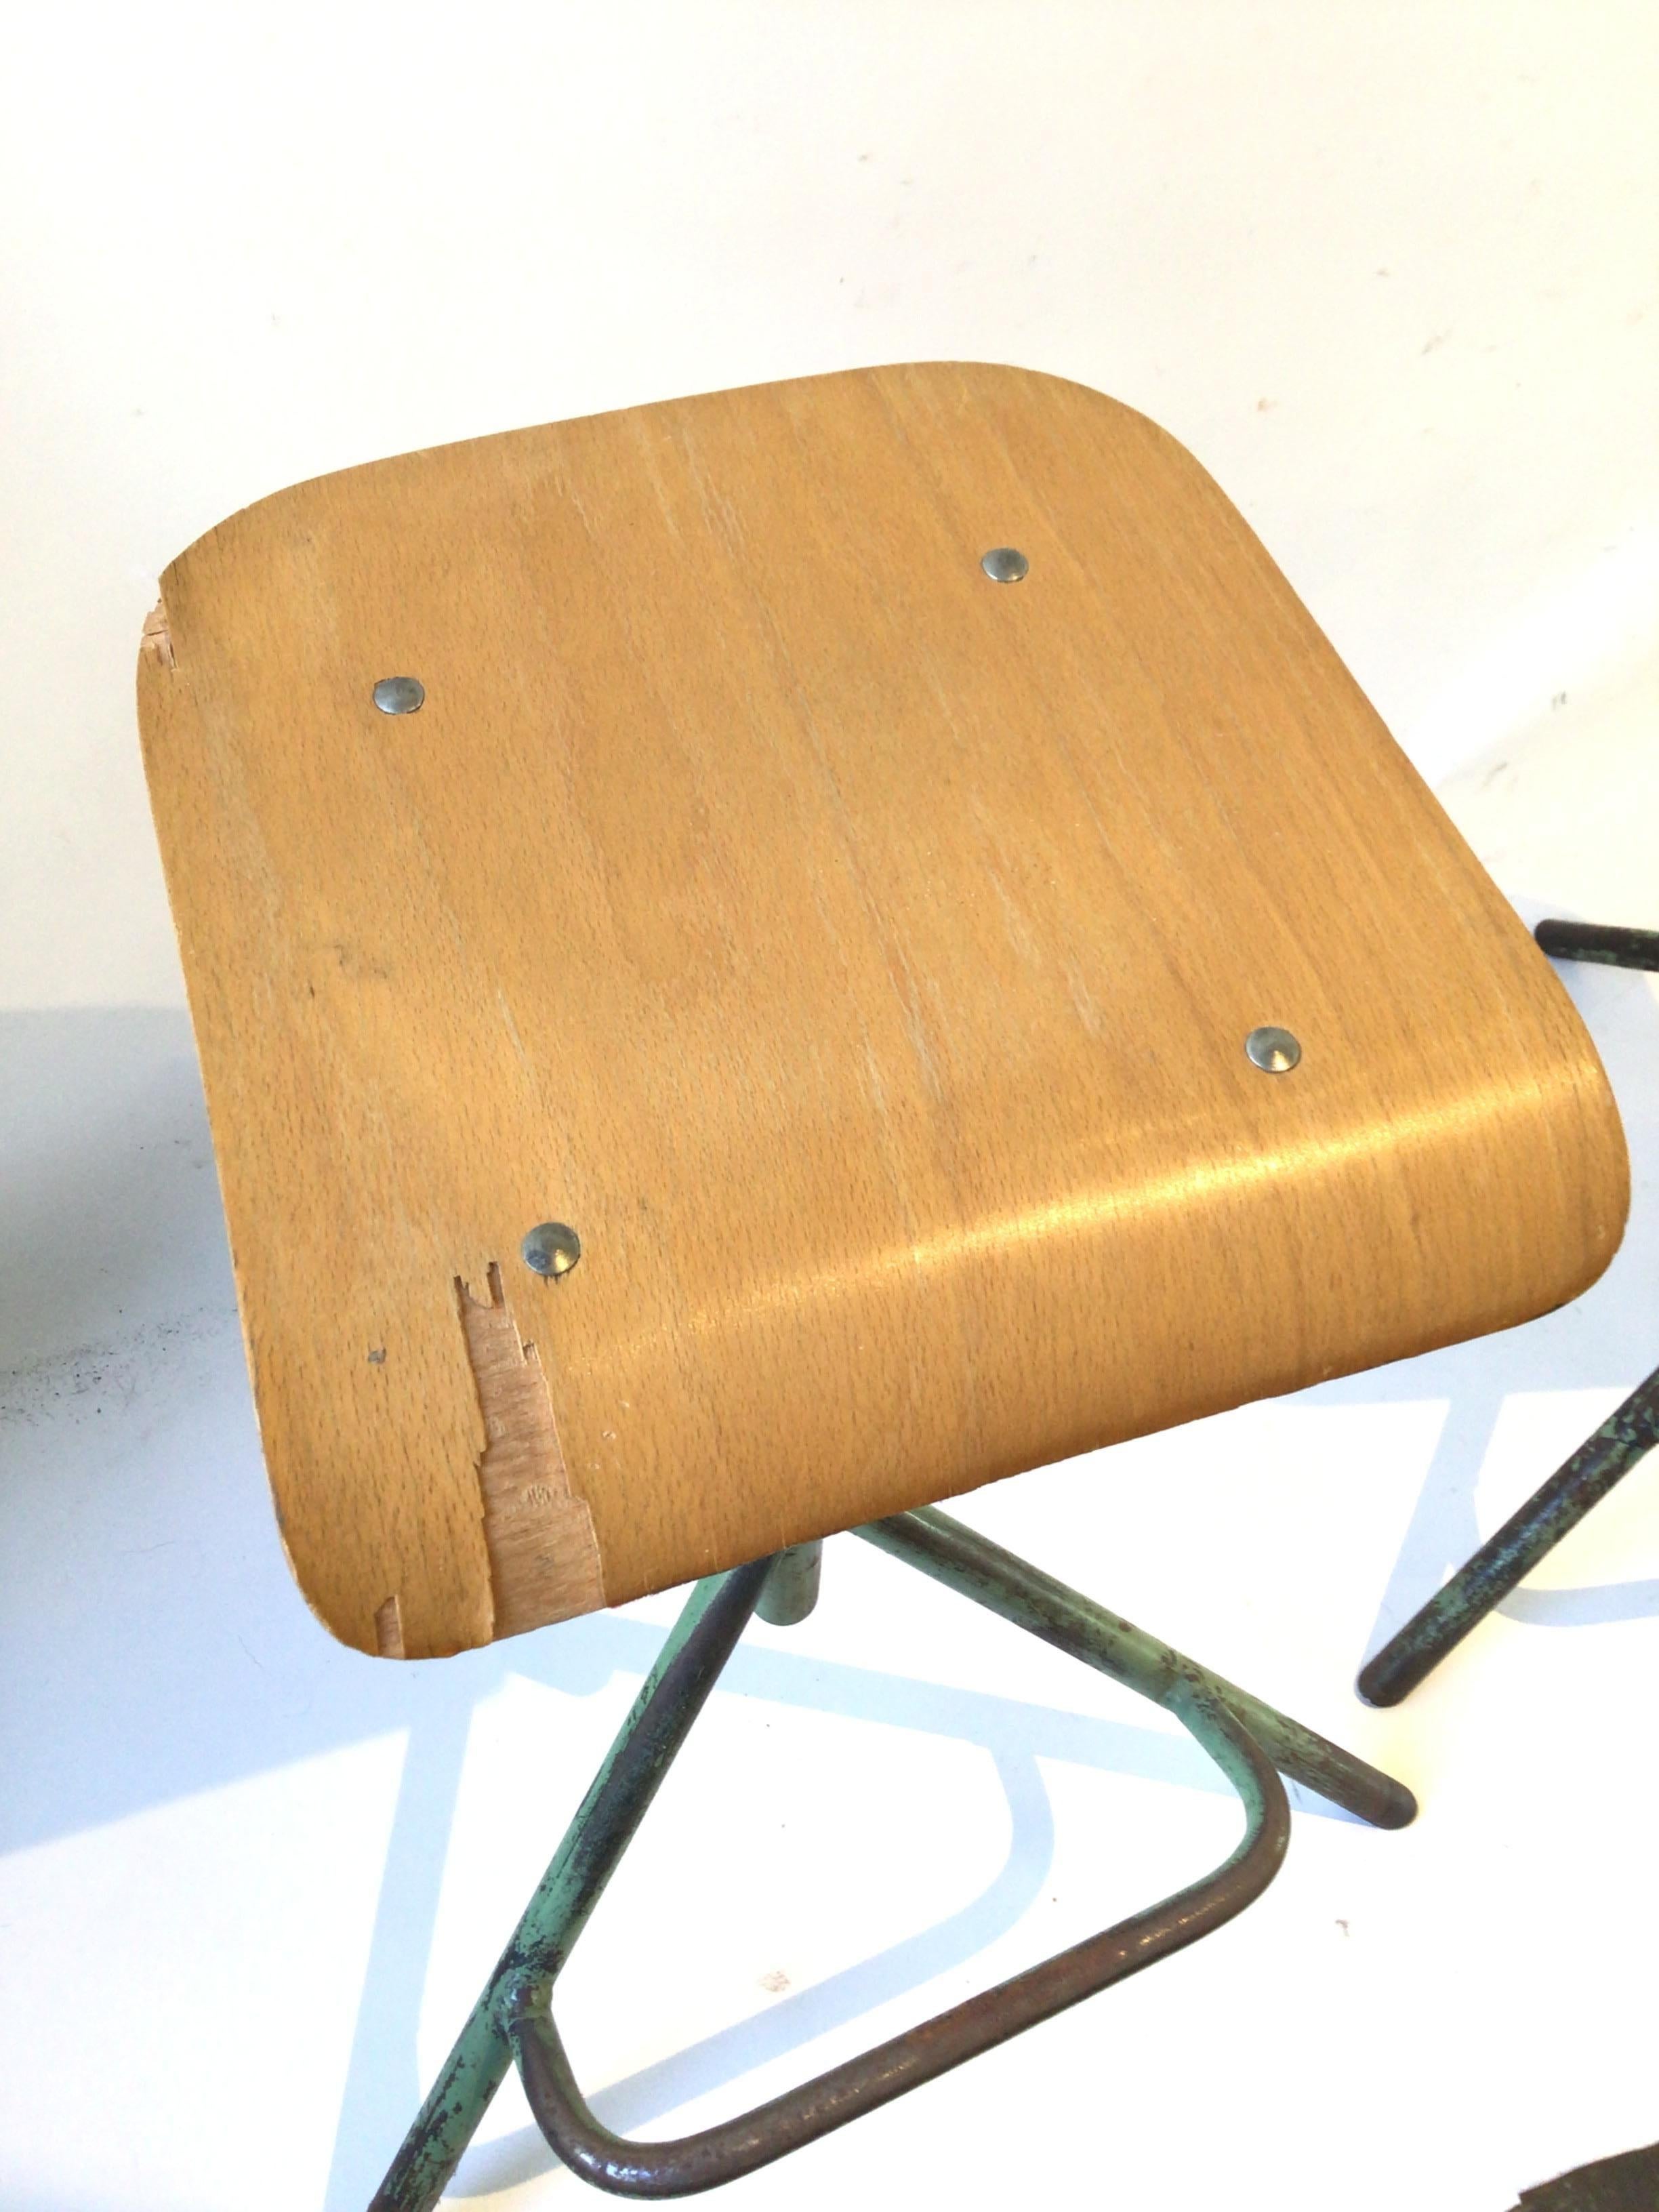 Pair of 1940s Industrial adjustable stools. Wood seats, iron bases. Chips in wood on one seat as shown in pictures.
This item can be shipped through UPS.